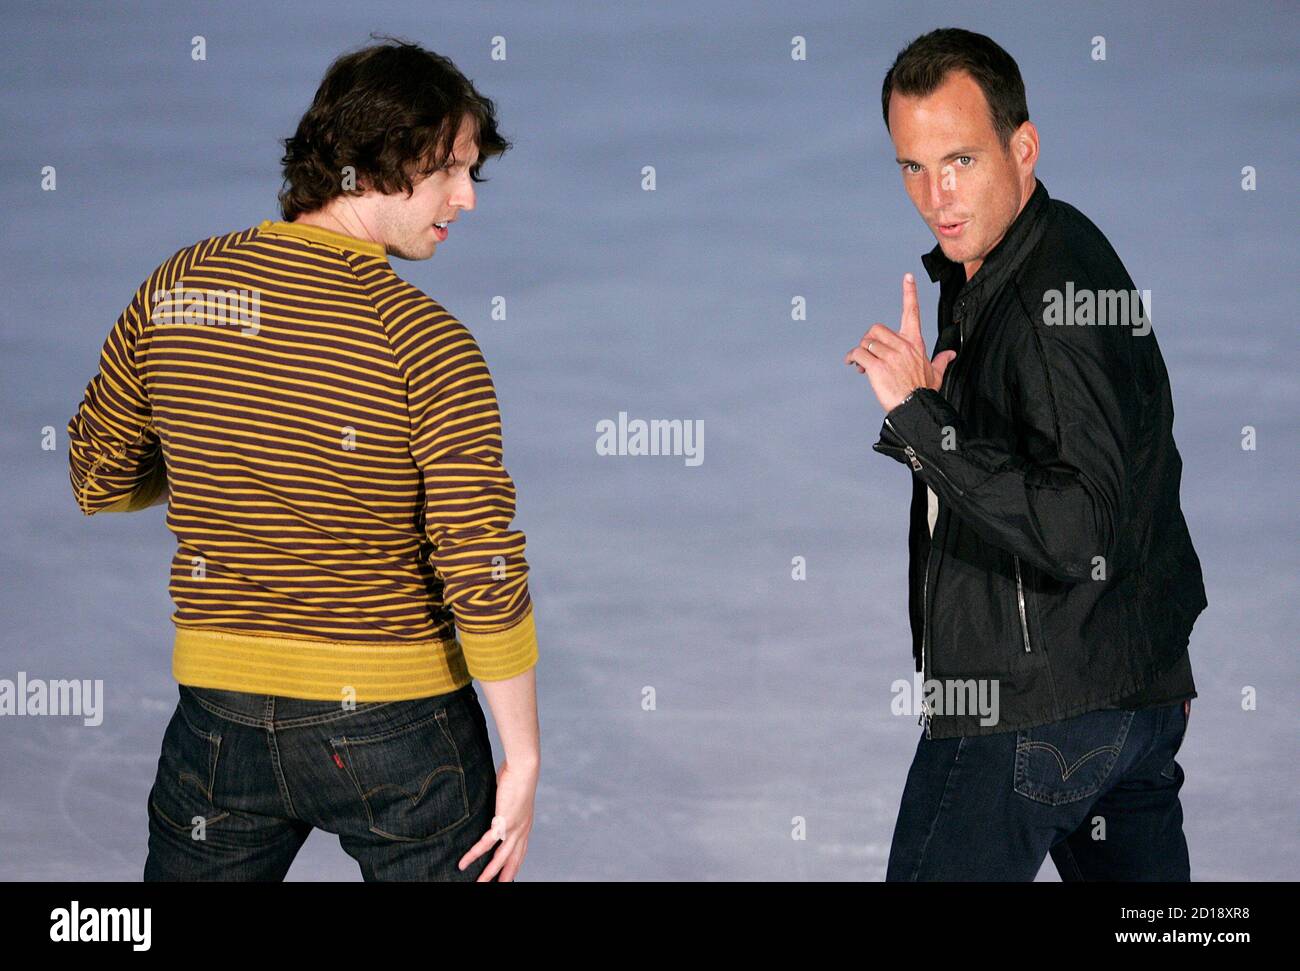 Actors Jon Heder (L) and Will Arnett pose for photographers during a media opportunity at an ice skating rink to promote their film "Blades of Glory" in Sydney June 6, 2007.         REUTERS/Tim Wimborne     (AUSTRALIA) Foto Stock